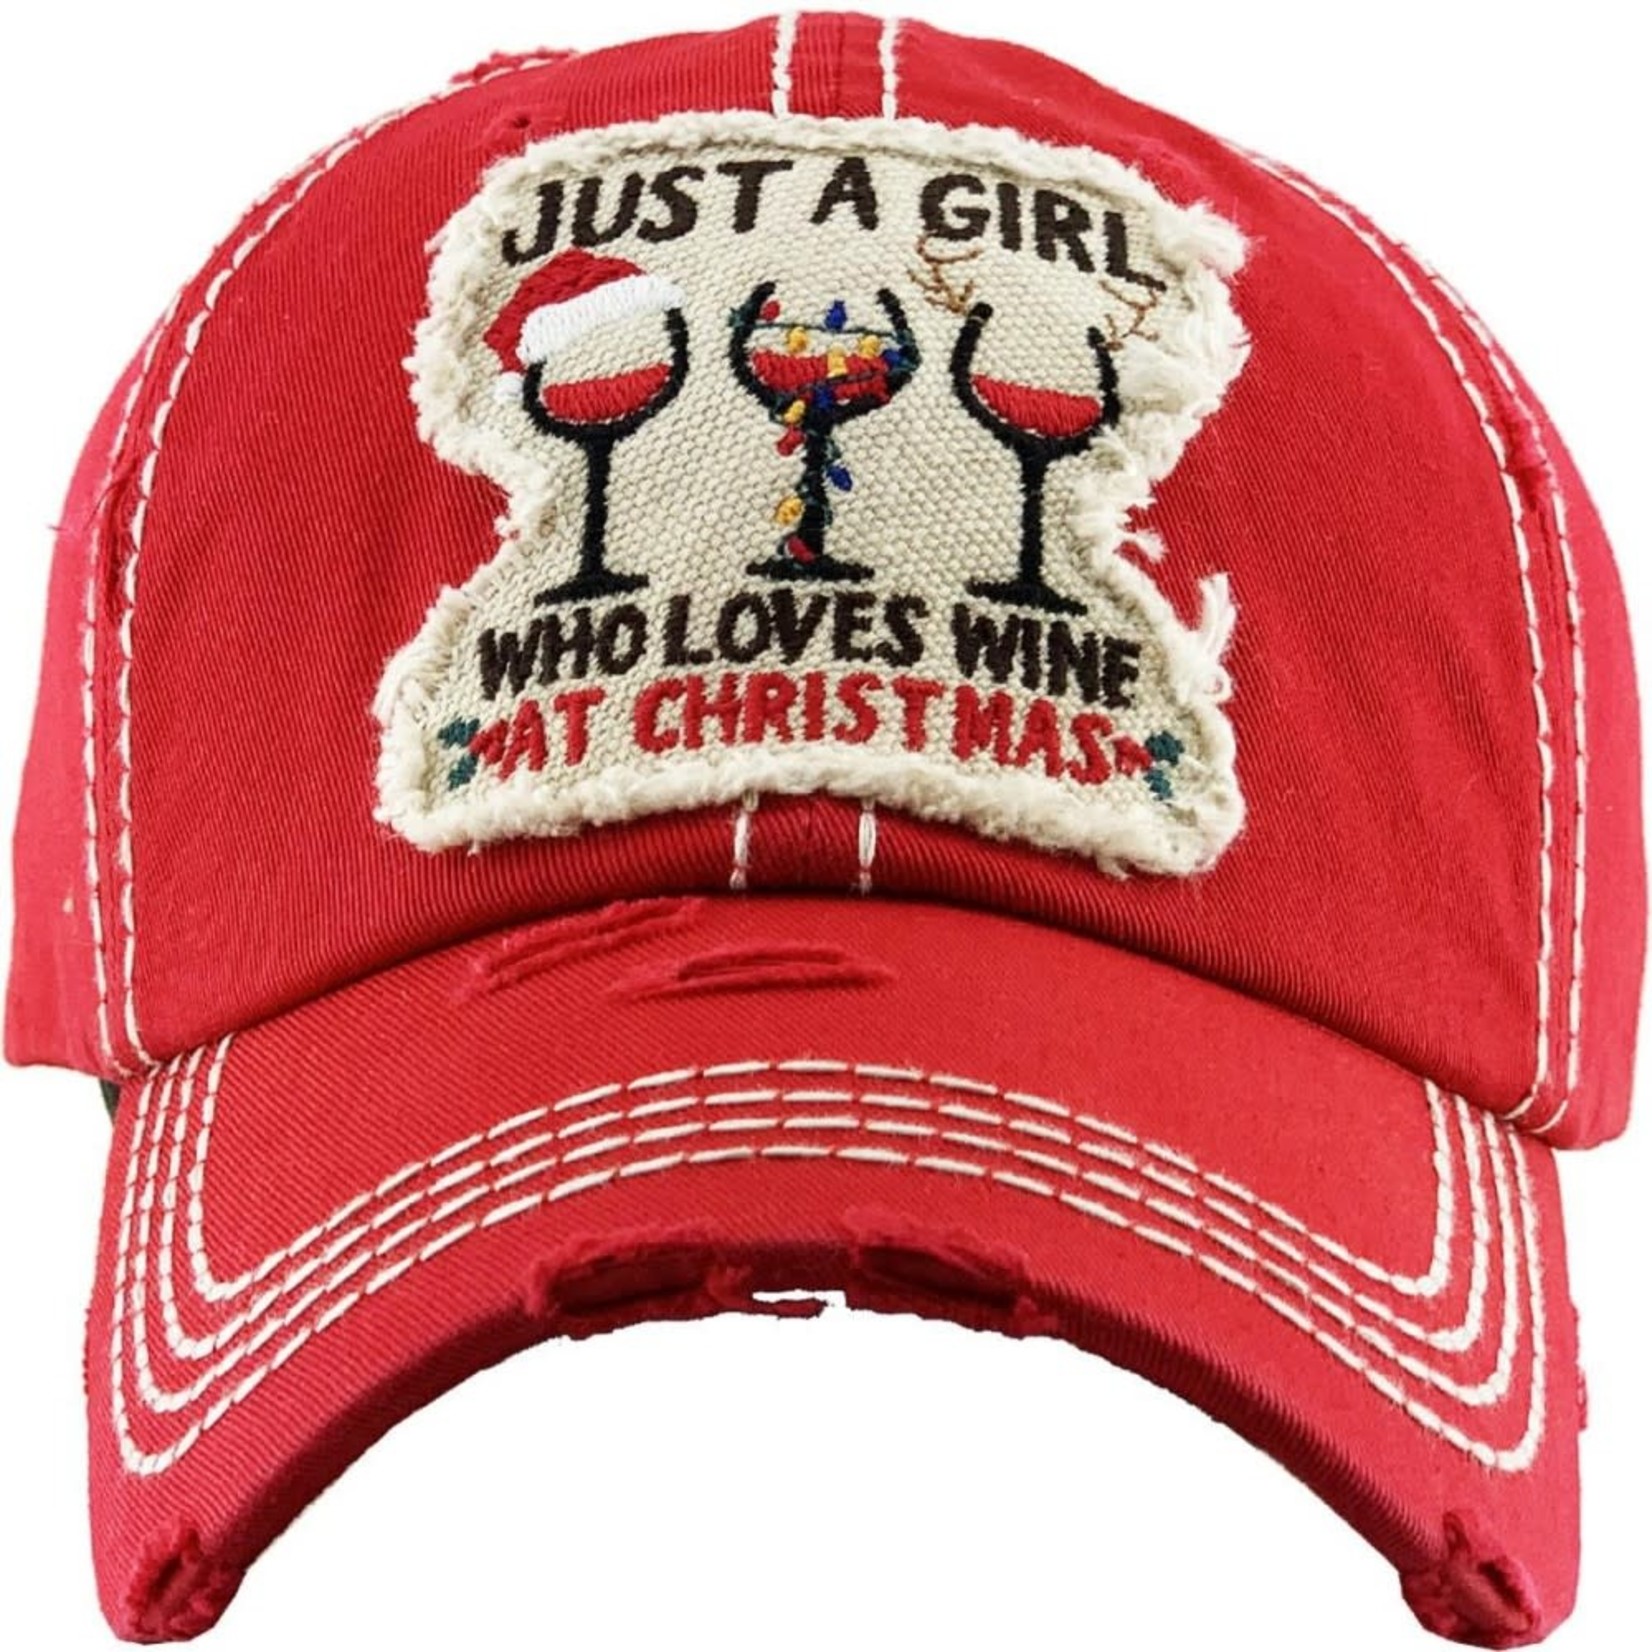 Just a Girl who loves wine at Christmas Red Cap